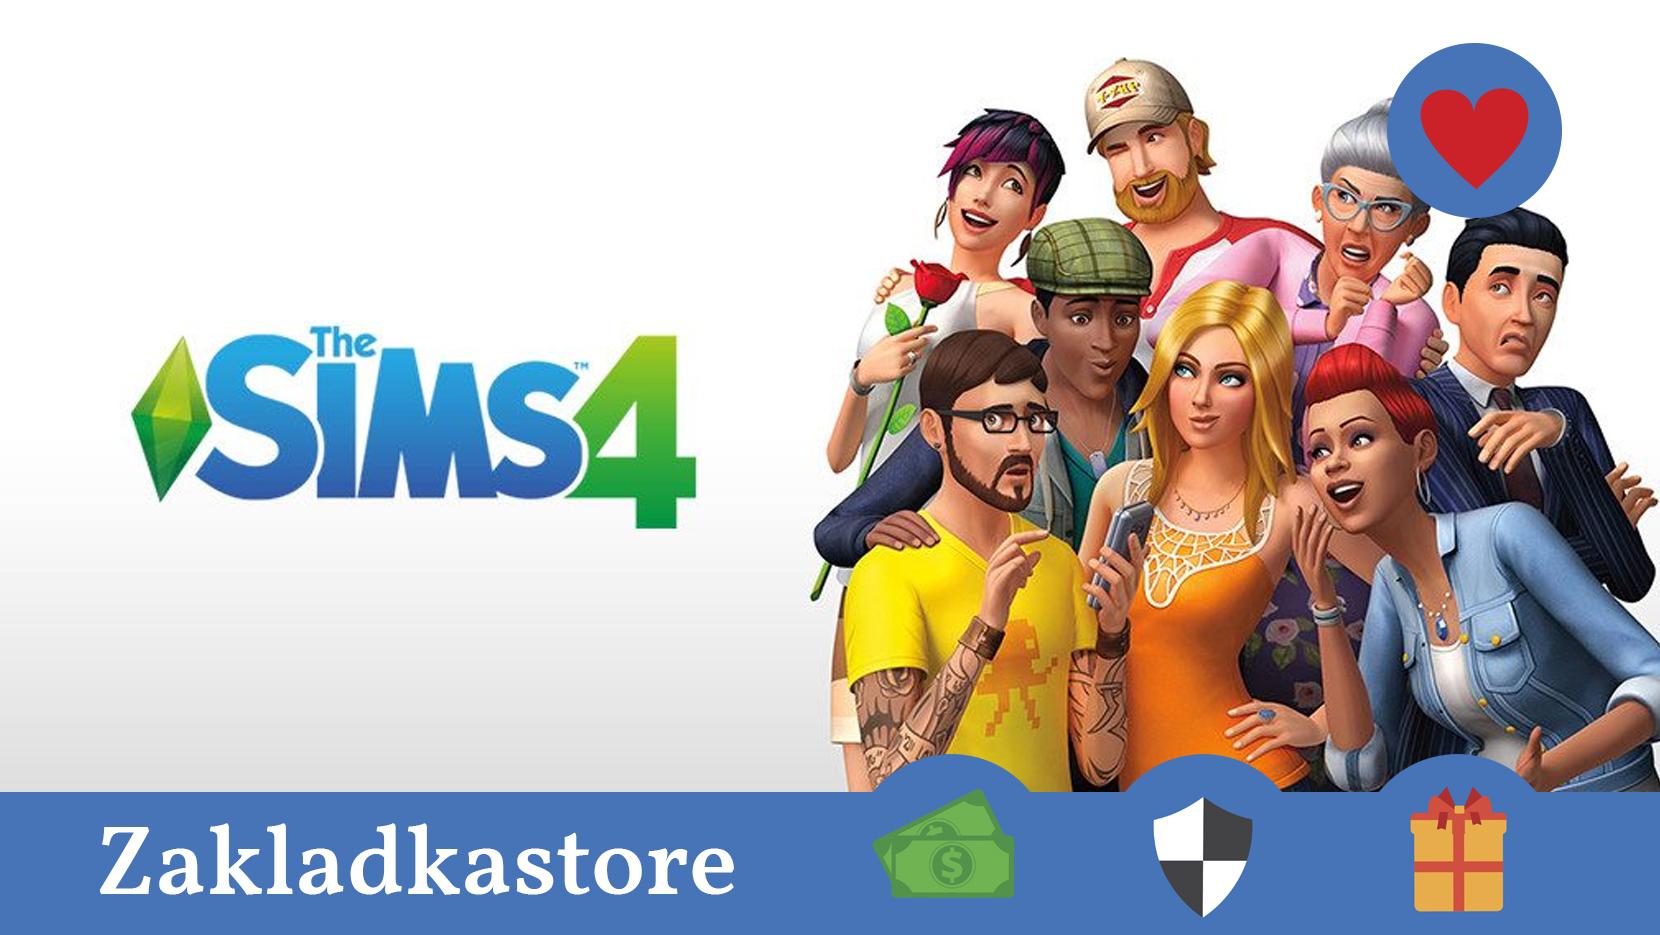 The sims 4 steam price фото 60